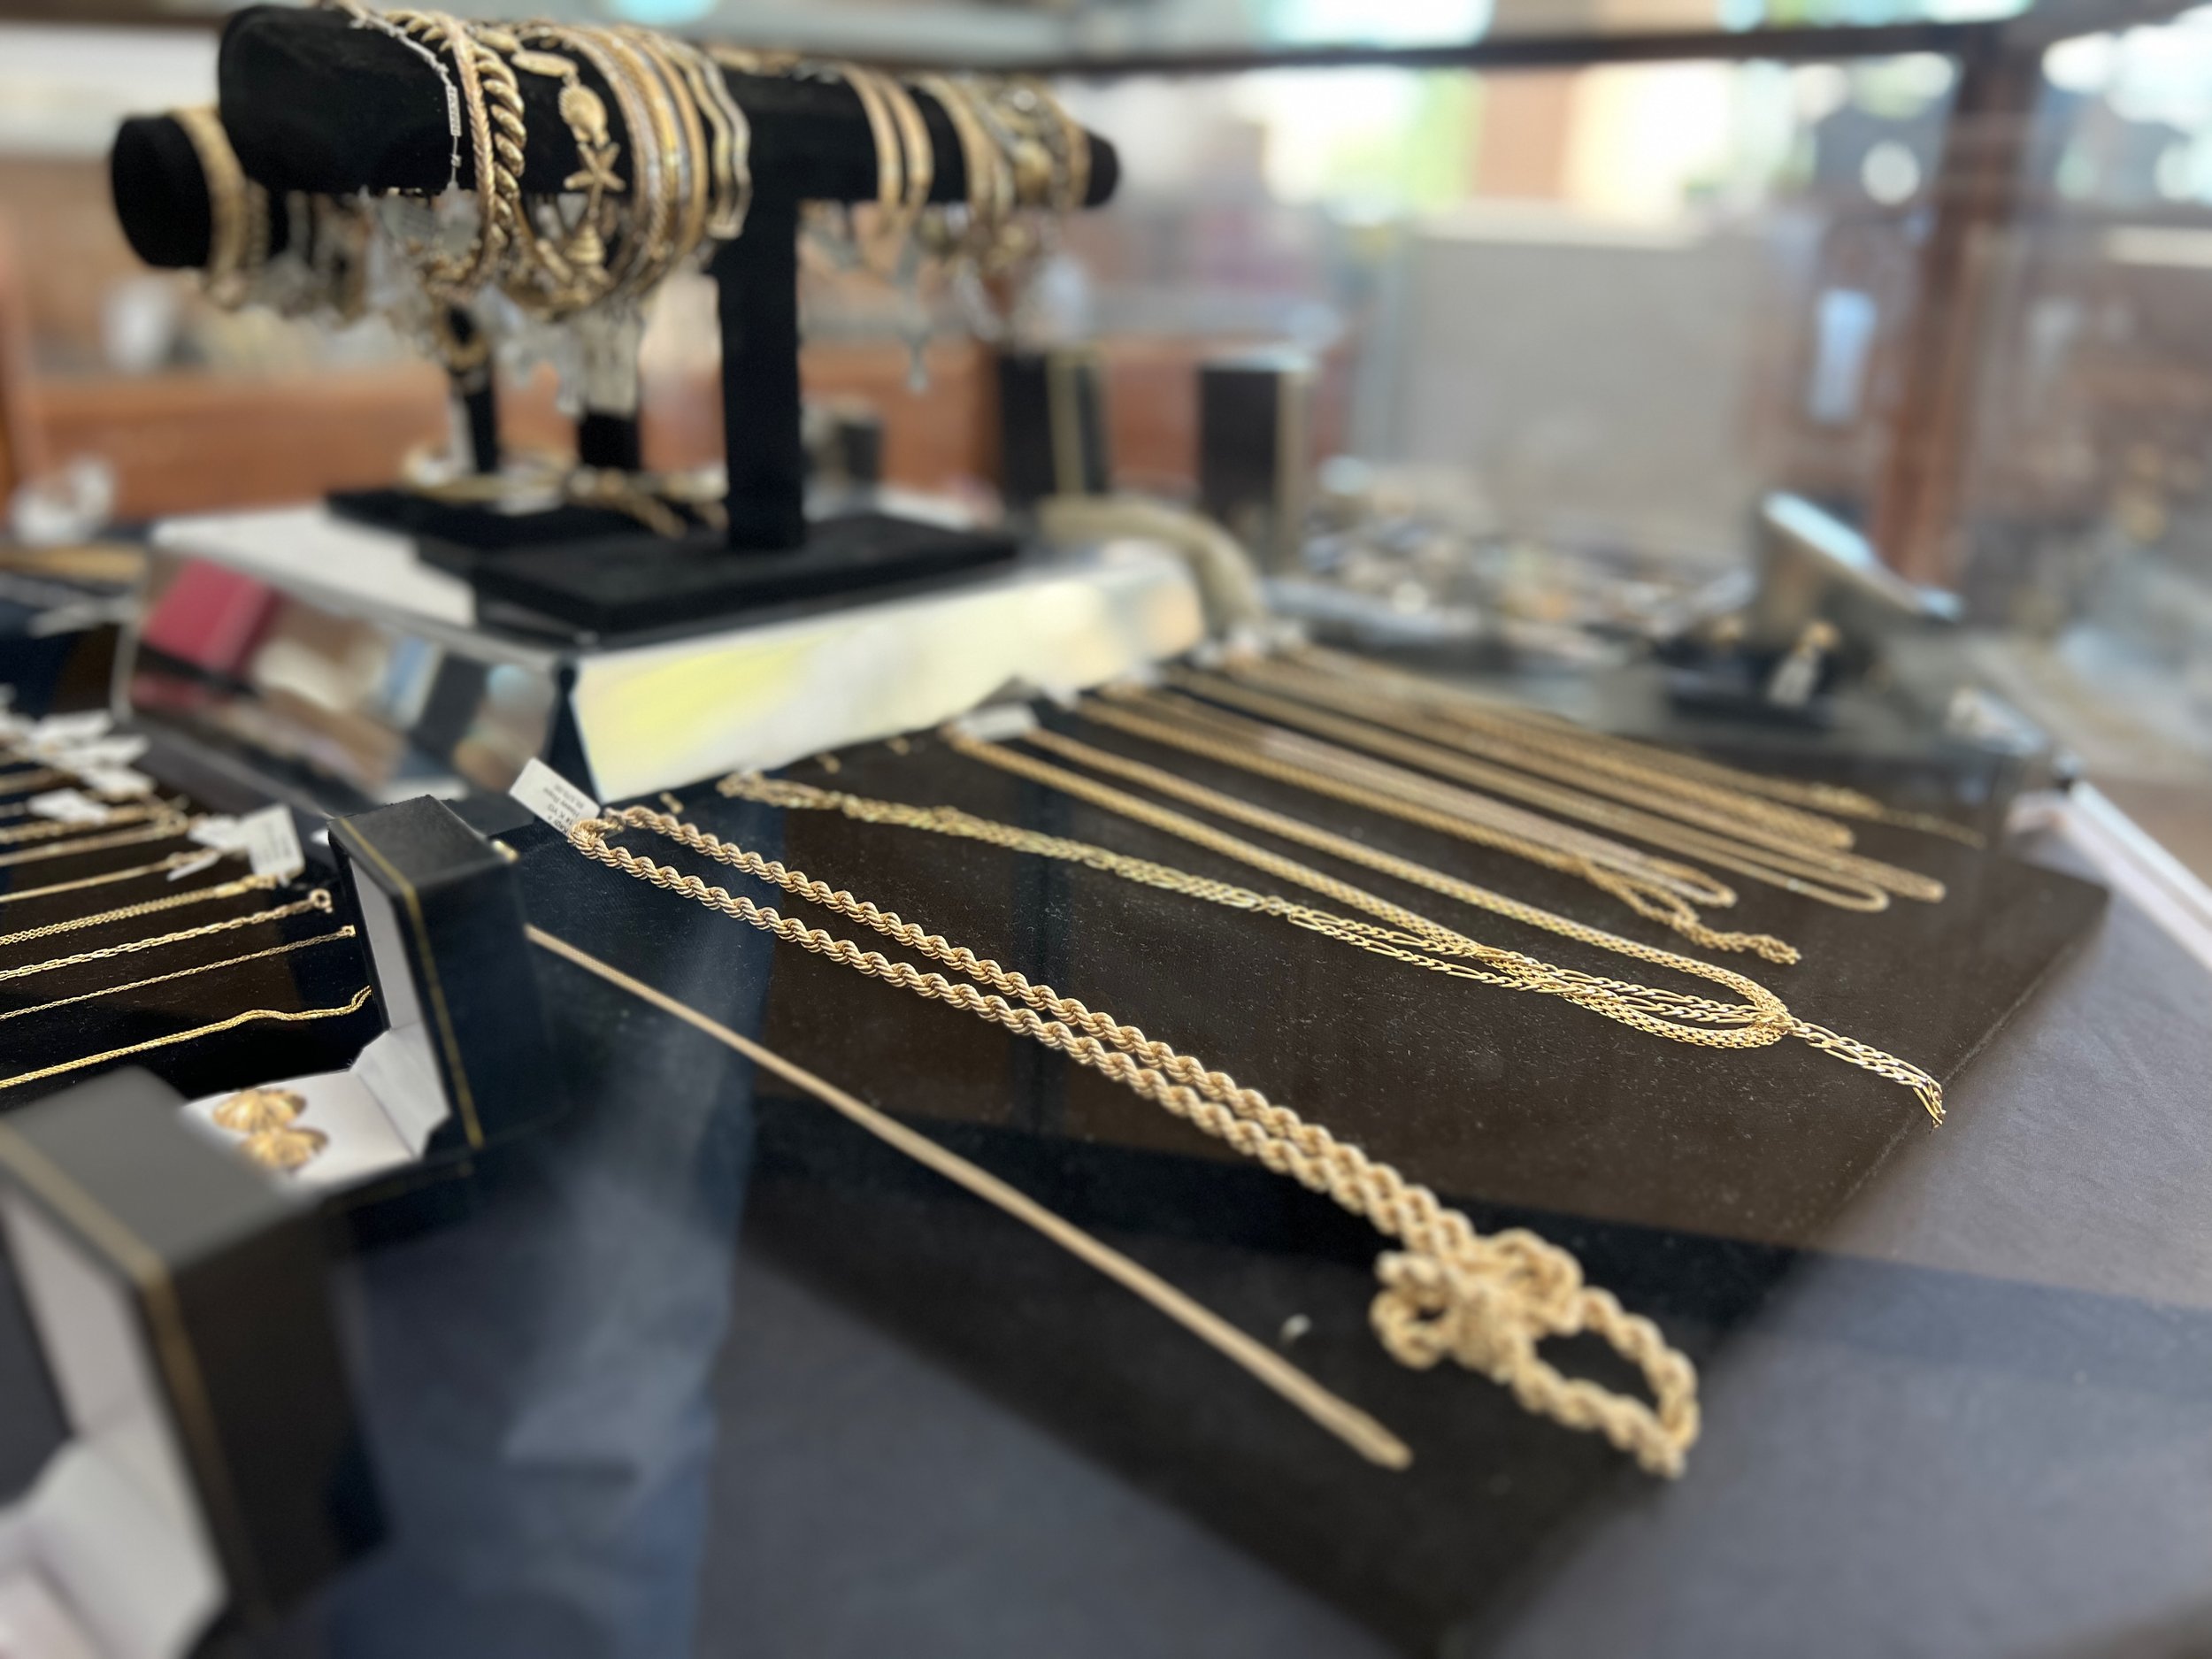 Why You Should Avoid Pawning Jewelry